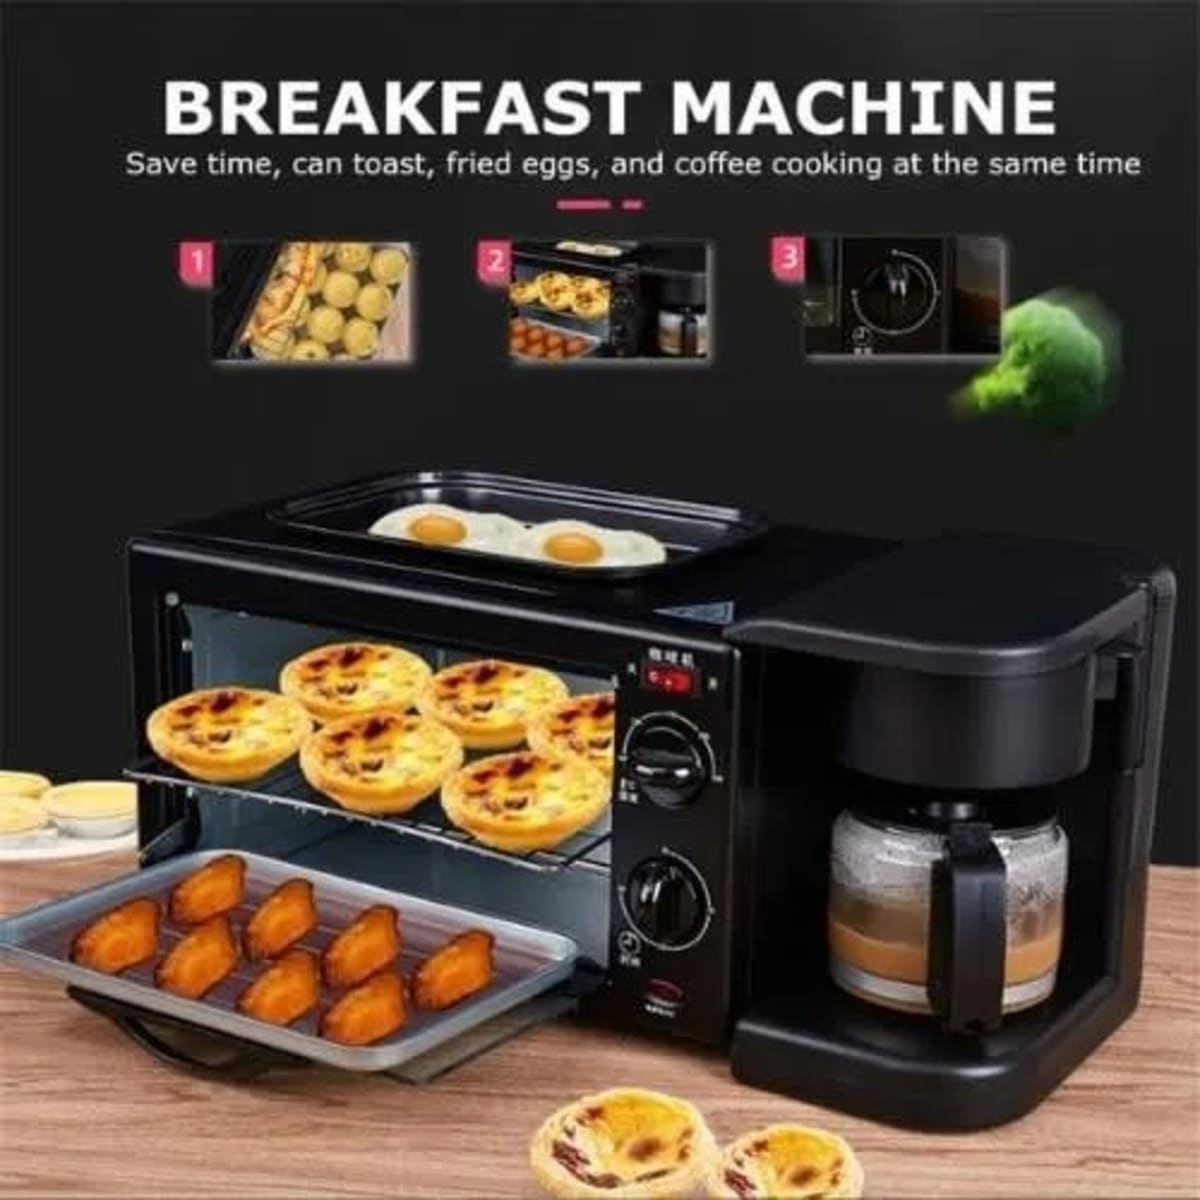 Sokany 3 In 1 Breakfast Maker Sk-145 Toaster with Frying Pan, Portable Oven  Breakfast Maker with Coffee Machine, Non Stick Die Cast Grill/Griddle for